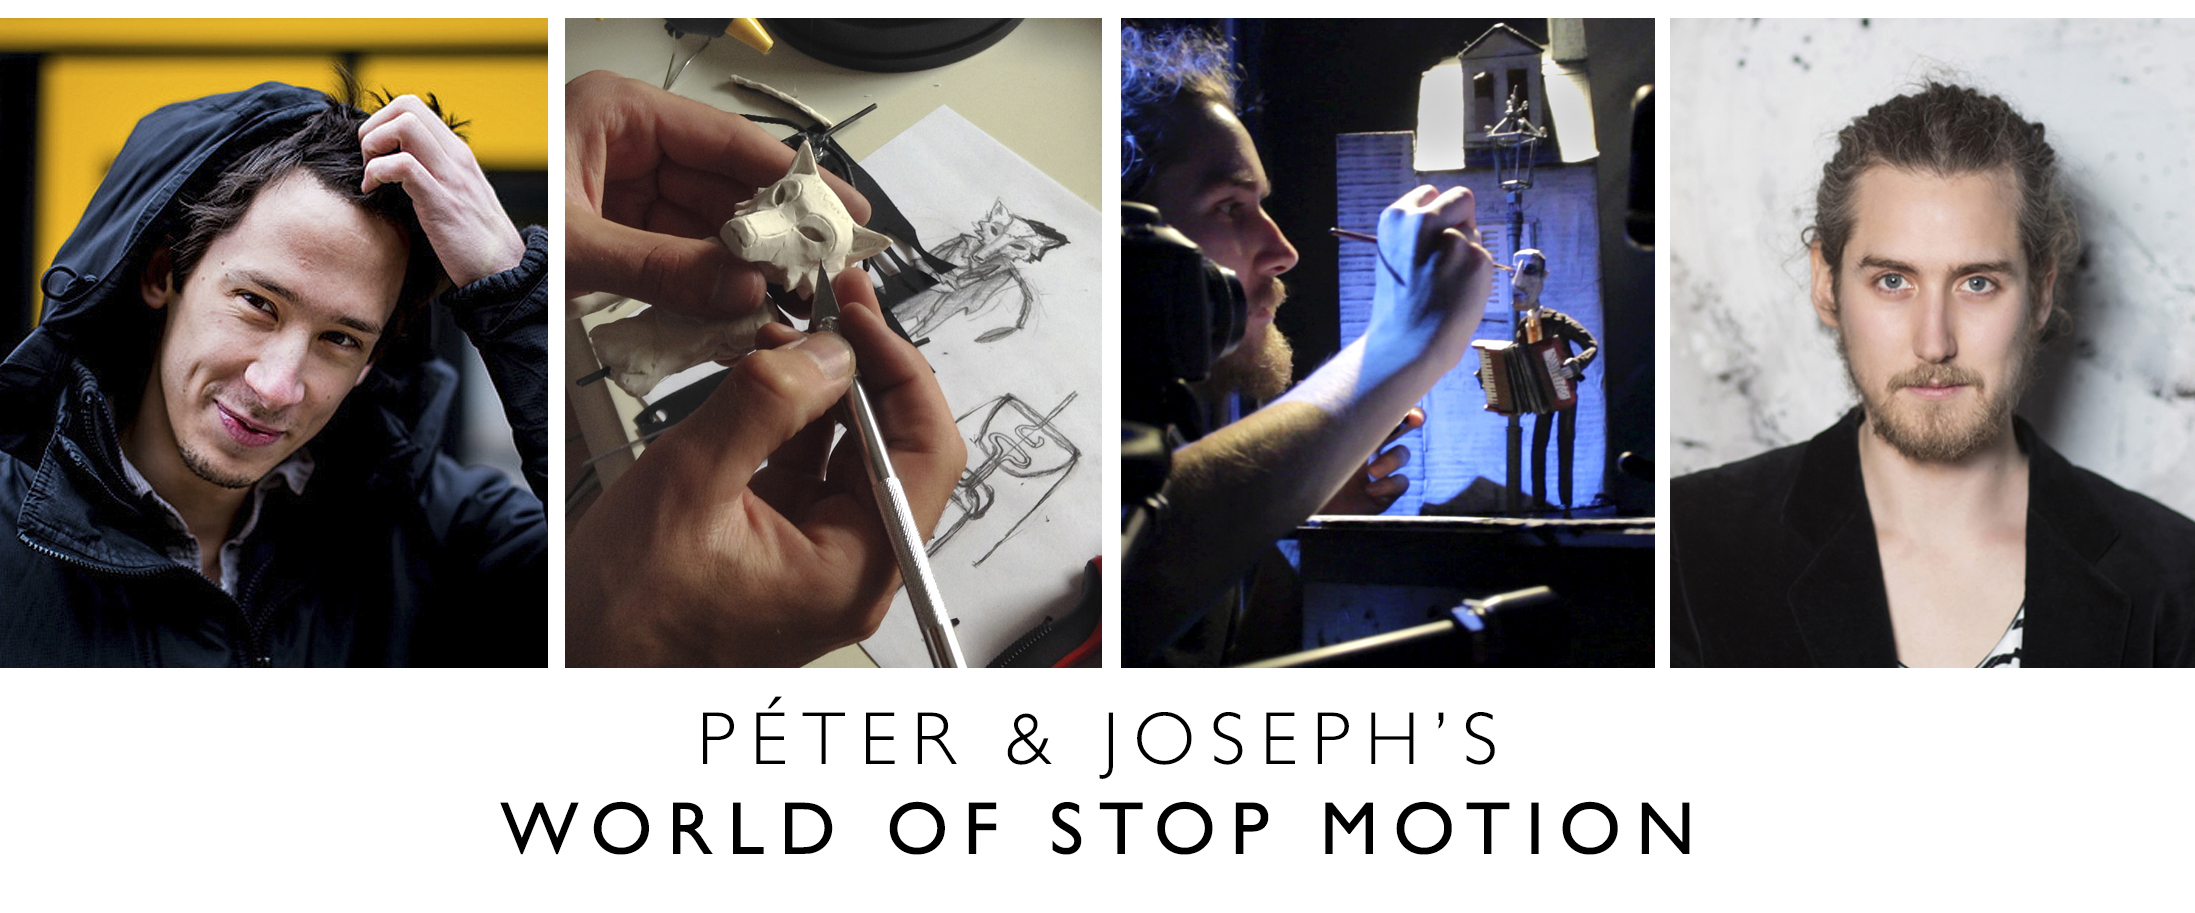 Stop-Motion Workshop with Joseph Wallace, Peter Vacz at 2017 Primanima